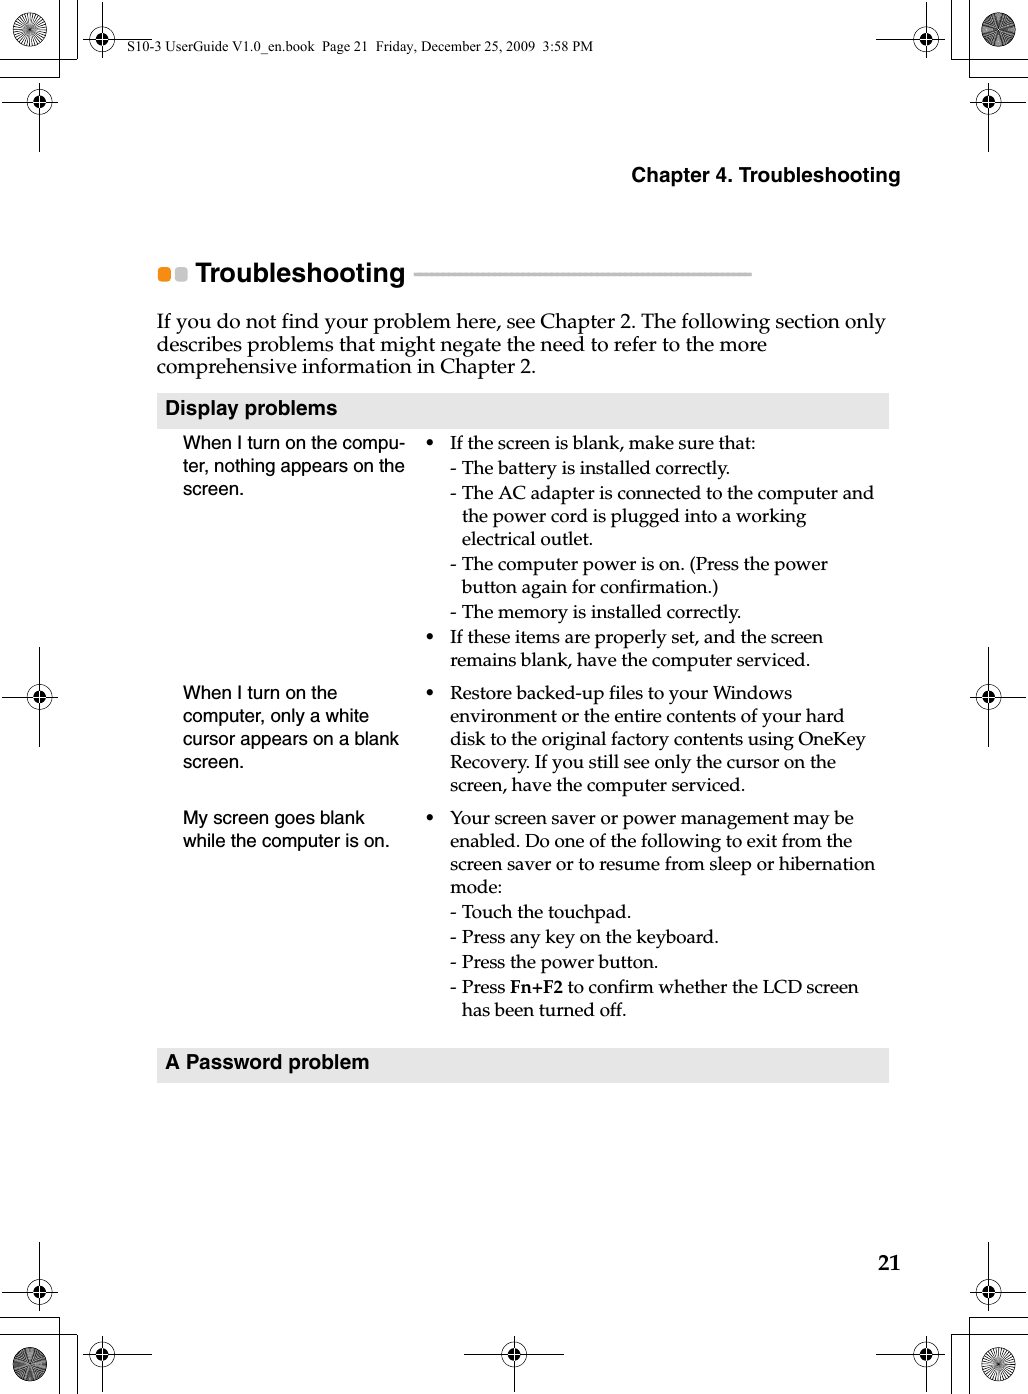 Chapter 4. Troubleshooting21Troubleshooting  - - - - - - - - - - - - - - - - - - - - - - - - - - - - - - - - - - - - - - - - - - - - - - - - - - - - - - - - - - -If you do not find your problem here, see Chapter 2. The following section only describes problems that might negate the need to refer to the more comprehensive information in Chapter 2.Display problemsWhen I turn on the compu-ter, nothing appears on the screen.•If the screen is blank, make sure that:- The battery is installed correctly. - The AC adapter is connected to the computer and the power cord is plugged into a working electrical outlet.- The computer power is on. (Press the power button again for confirmation.)- The memory is installed correctly. •If these items are properly set, and the screen remains blank, have the computer serviced. When I turn on the computer, only a white cursor appears on a blank screen. •Restore backed-up files to your Windows environment or the entire contents of your hard disk to the original factory contents using OneKey Recovery. If you still see only the cursor on the screen, have the computer serviced.My screen goes blank while the computer is on.•Your screen saver or power management may be enabled. Do one of the following to exit from the screen saver or to resume from sleep or hibernation mode:- Touch the touchpad.- Press any key on the keyboard.- Press the power button.-Press Fn+F2 to confirm whether the LCD screen has been turned off.A Password problemS10-3 UserGuide V1.0_en.book  Page 21  Friday, December 25, 2009  3:58 PM